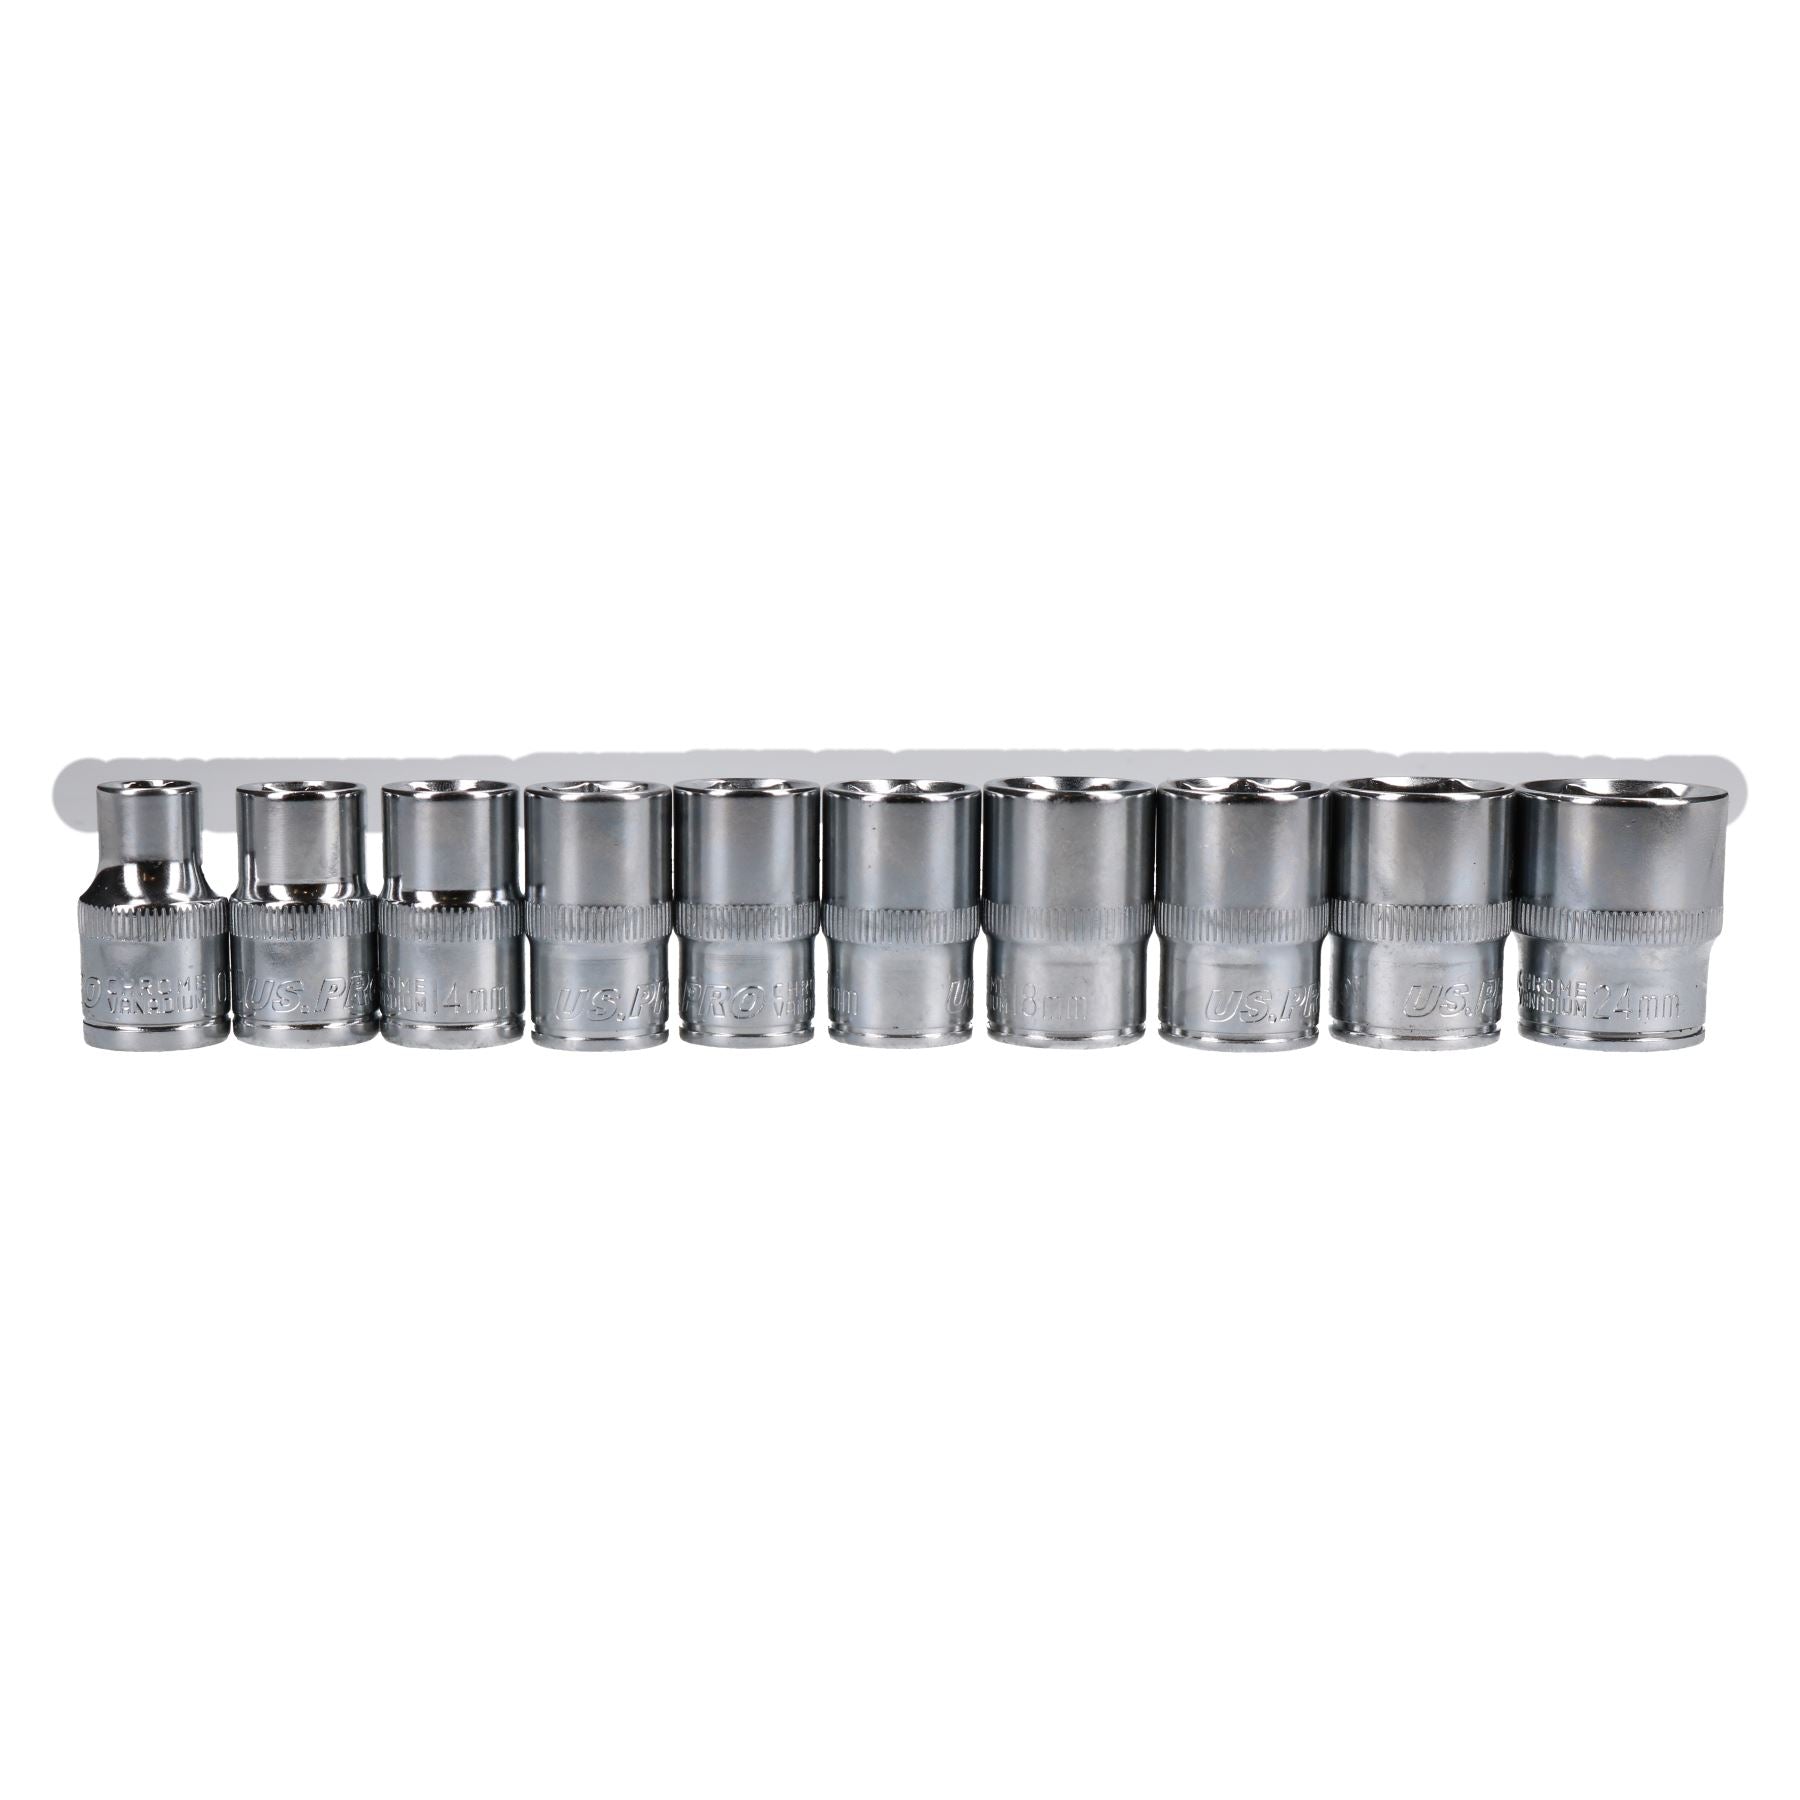 37pc 1/4" 3/8" And 1/2" Metric Shallow Socket And Accessory Set 4mm - 24mm